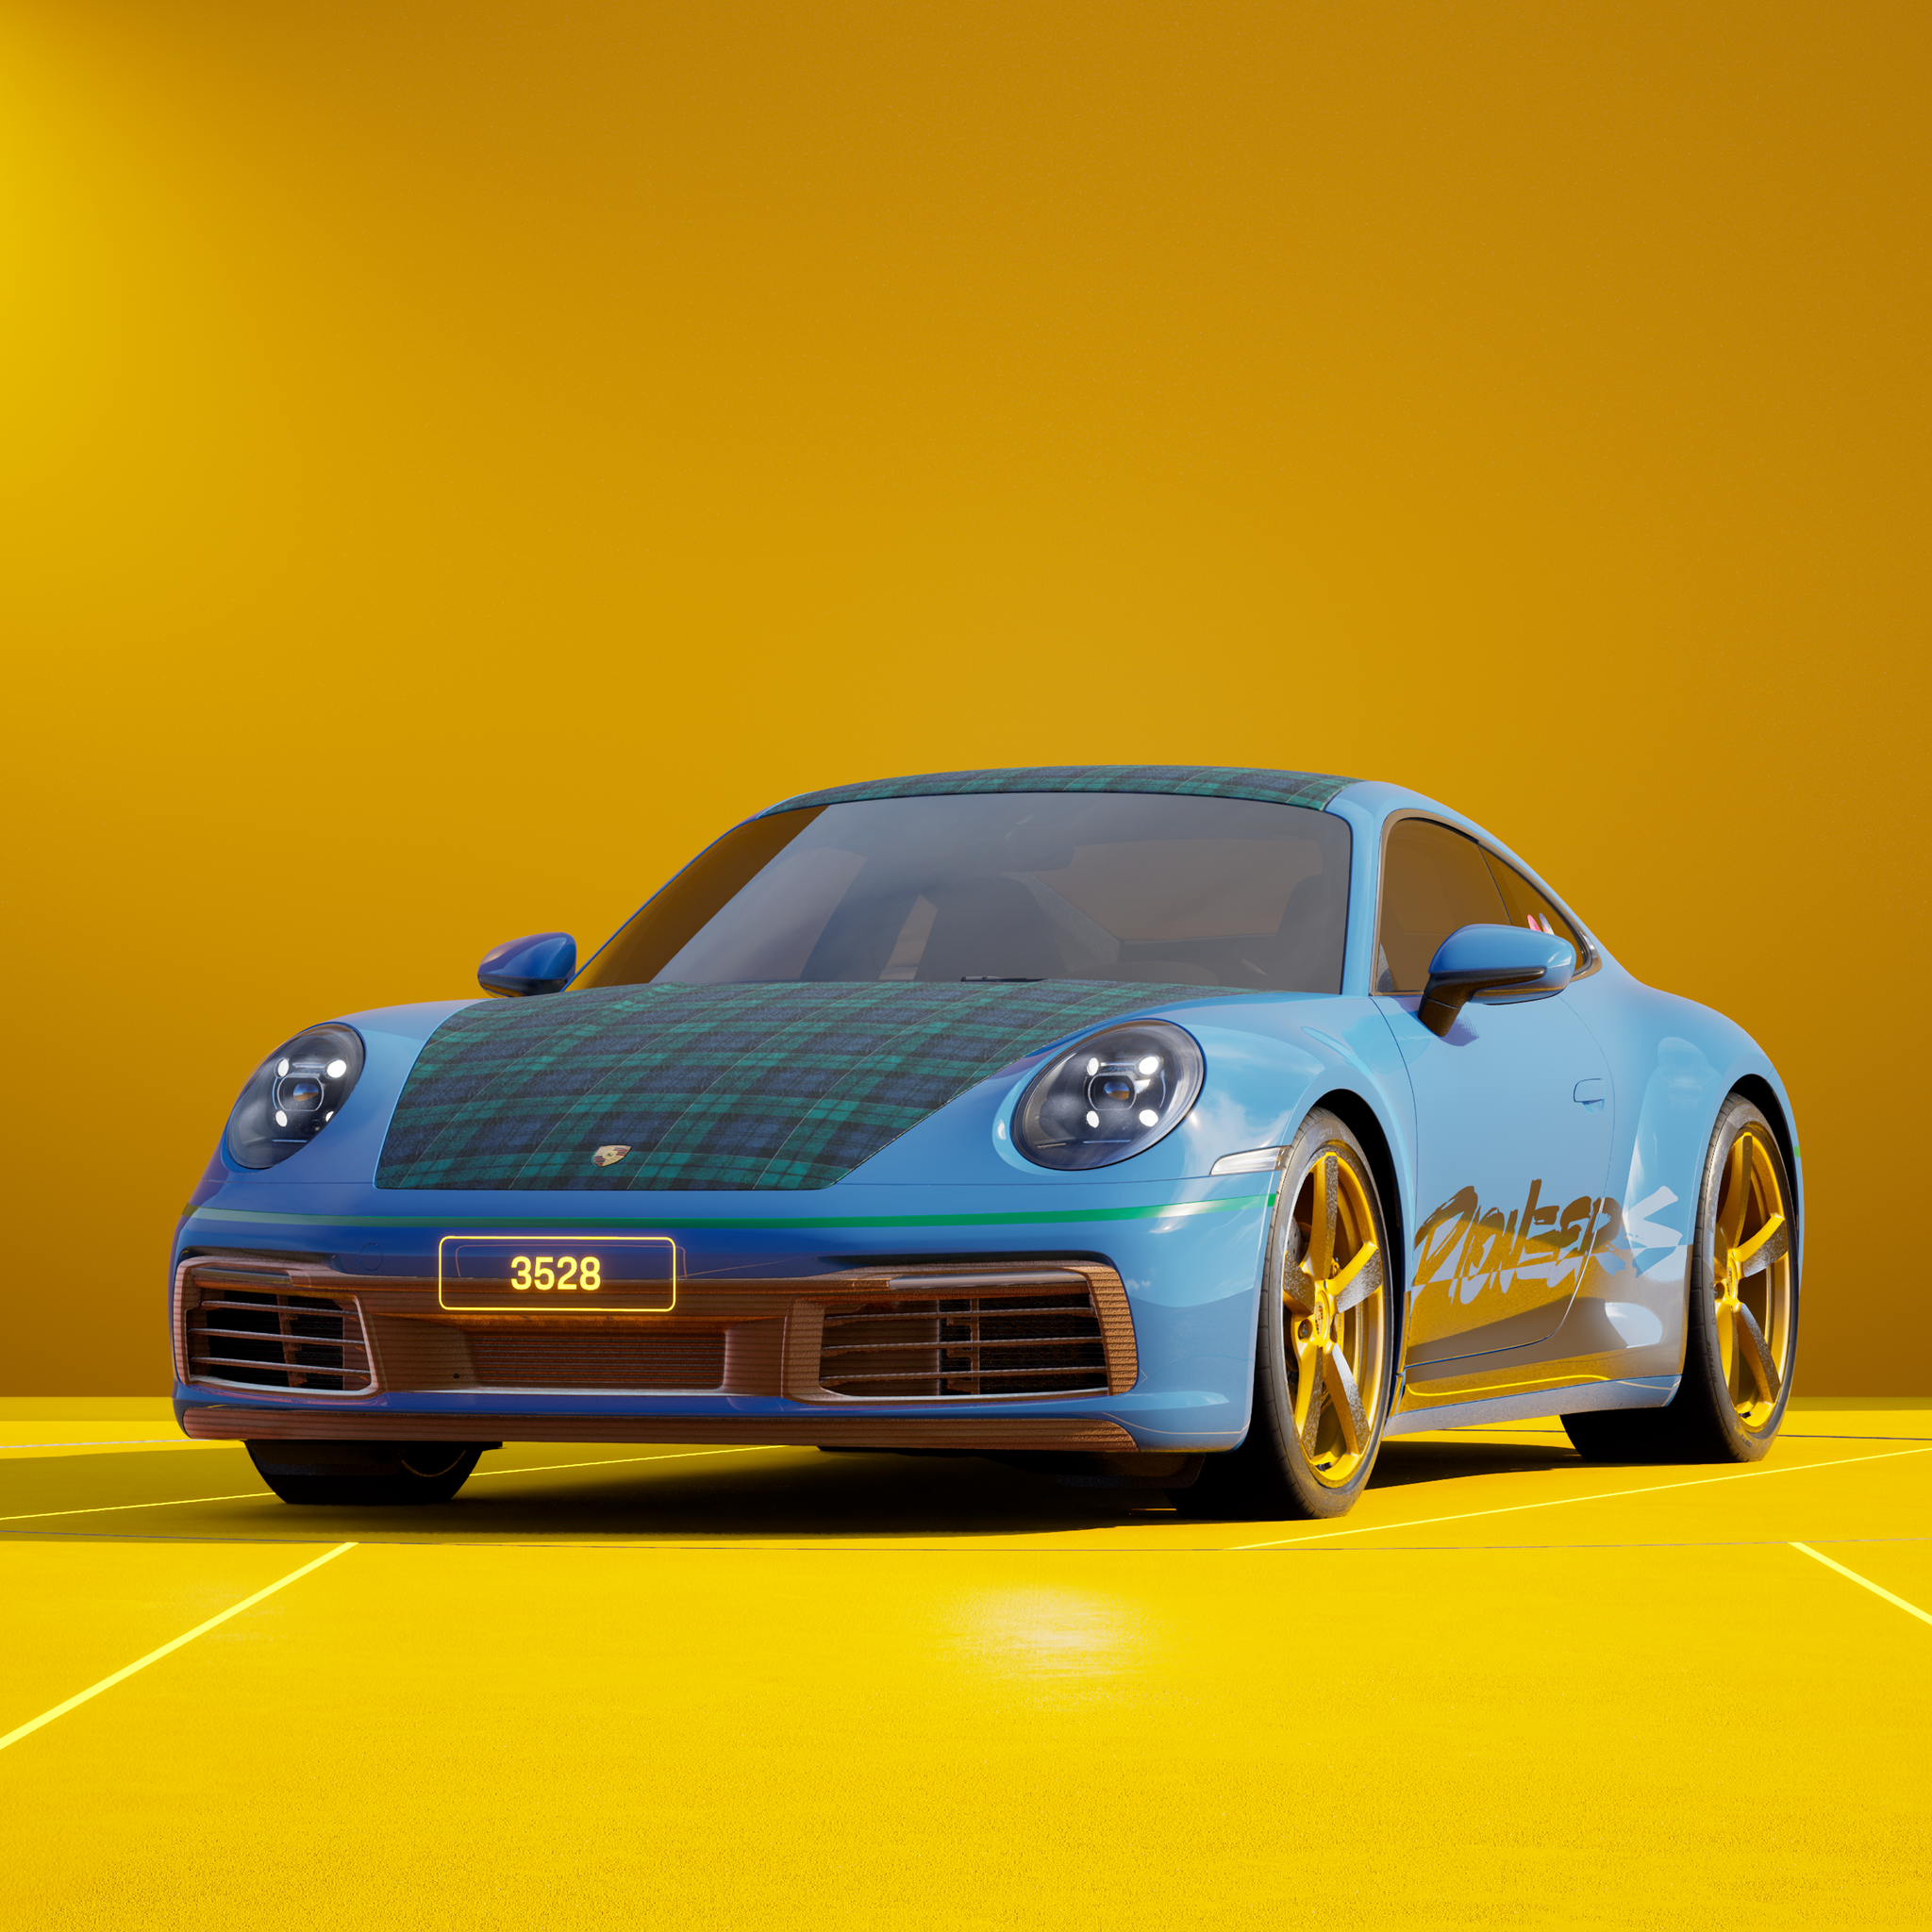 The PORSCHΞ 911 3528 image in phase